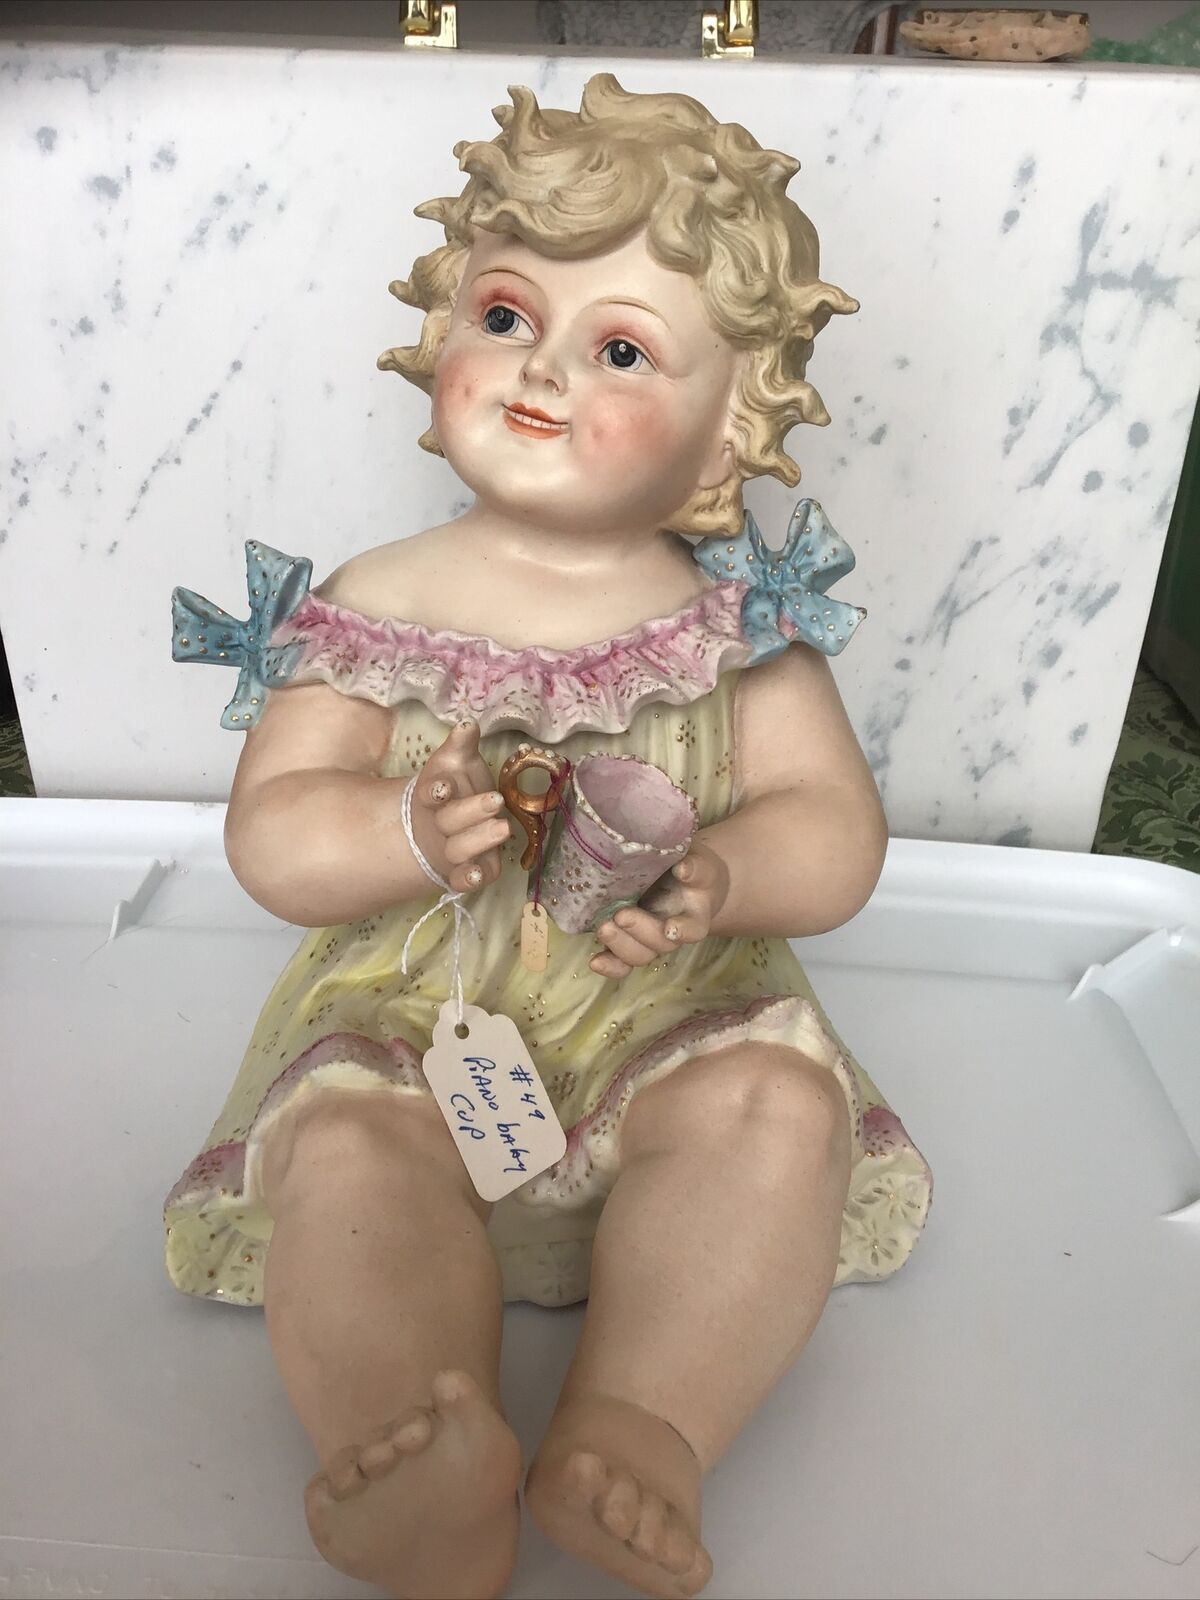 Lg. Antique Conta&Boehme BISQUE Porcelain PIANO Baby Figurine GIRL holding Cup